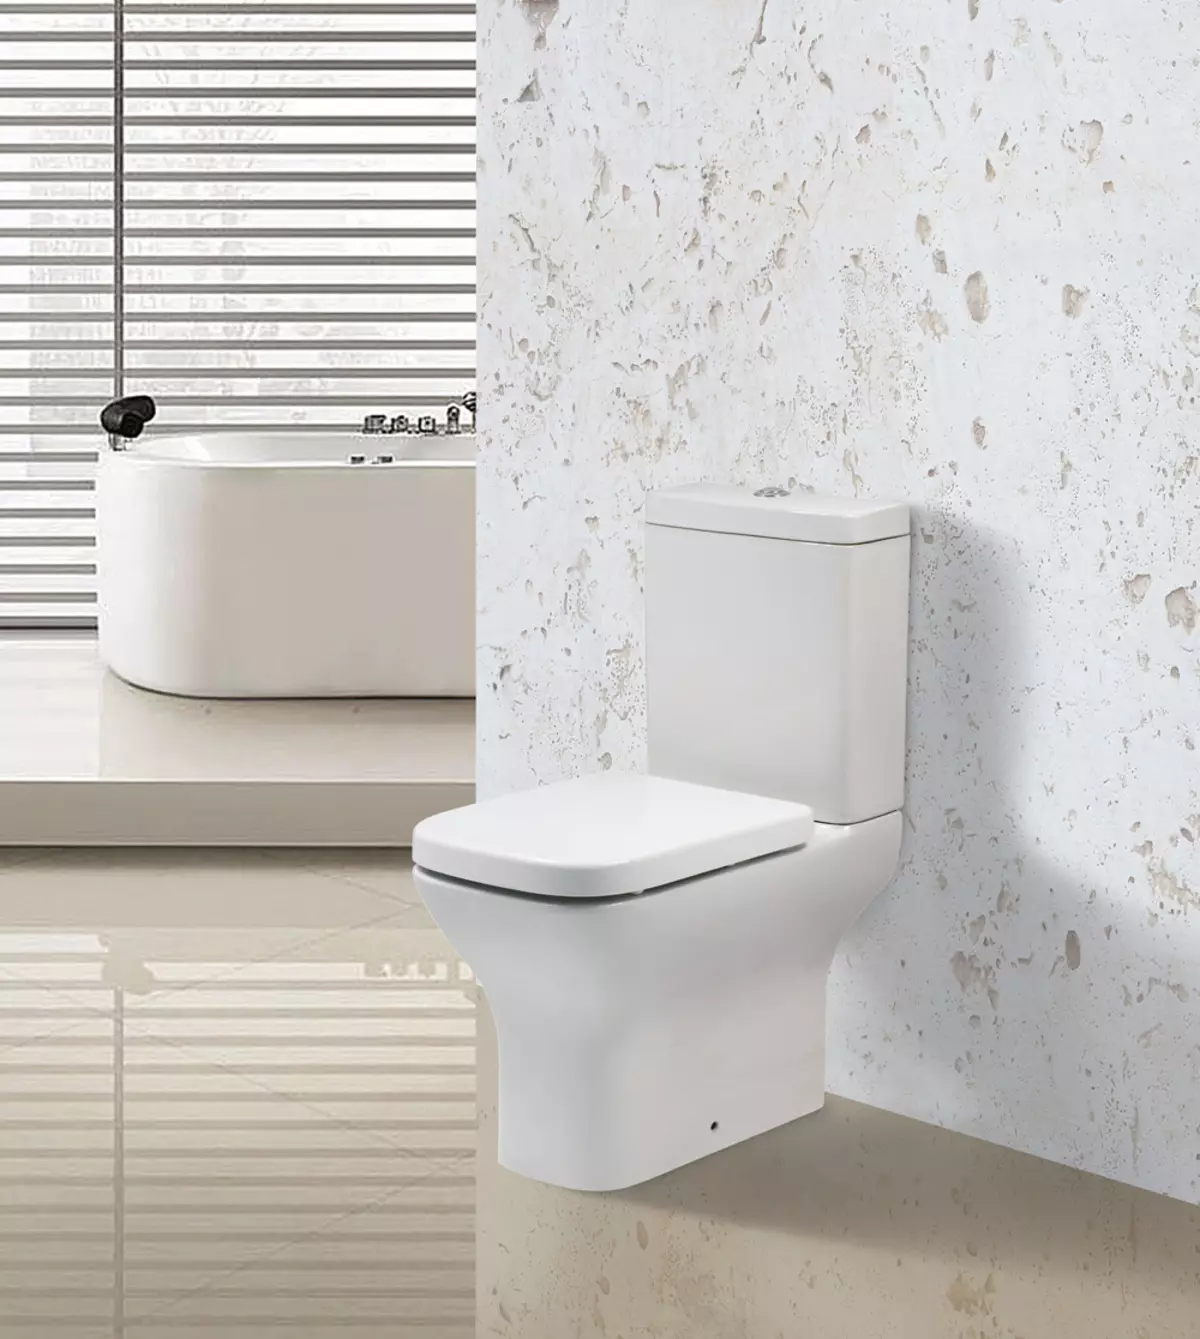 Toilets Belbagno: an overview of suspended and rimless toilet bowl of a series of Prospero and Alpina, Torino and Mattino, Ancona and Alba, Gala and Sfera. Reviews 10543_25